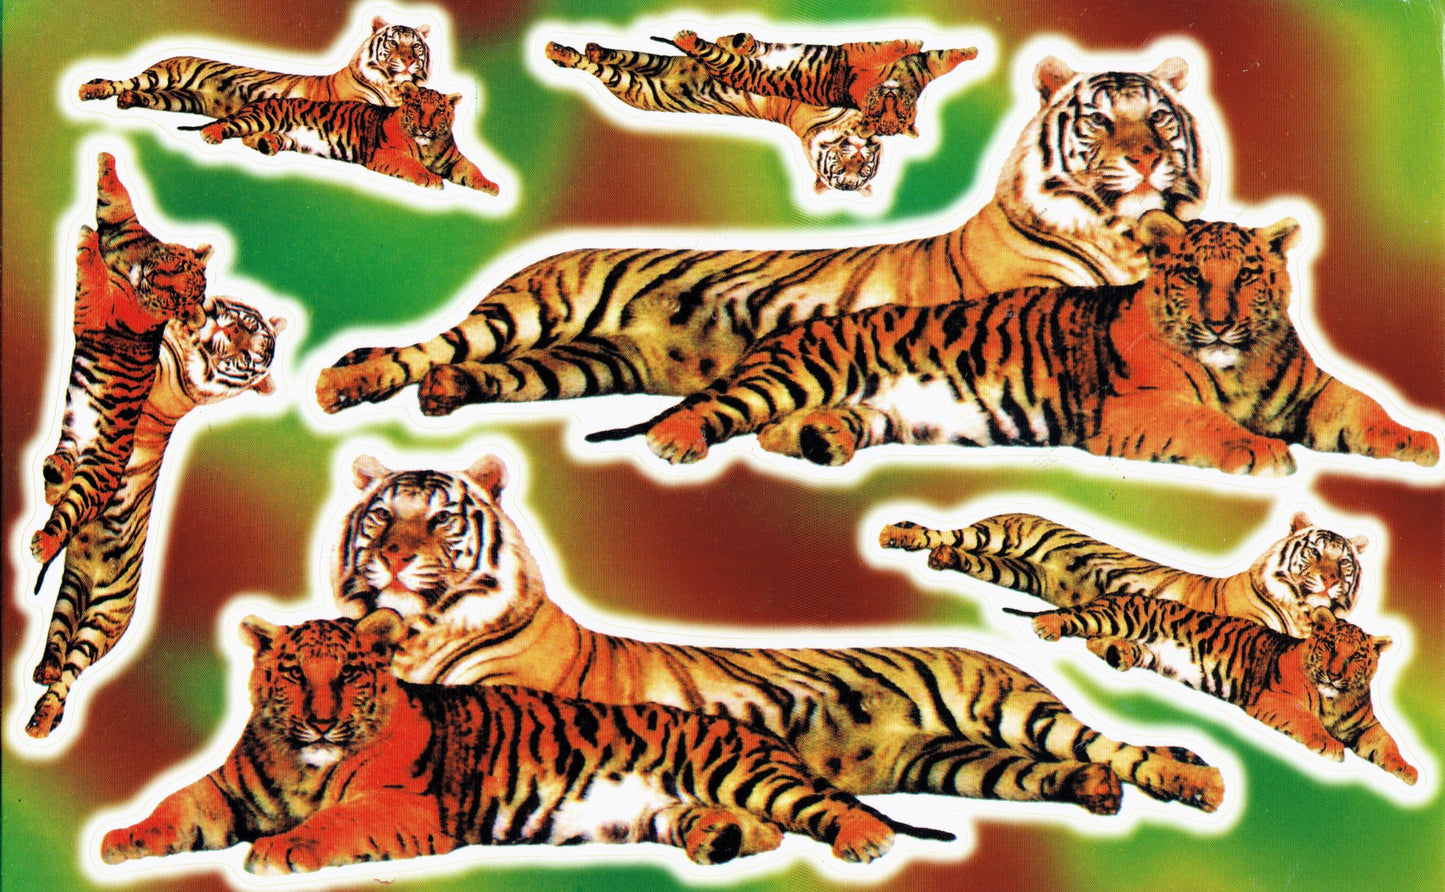 Tiger sticker motorcycle scooter skateboard car tuning model building self-adhesive 519